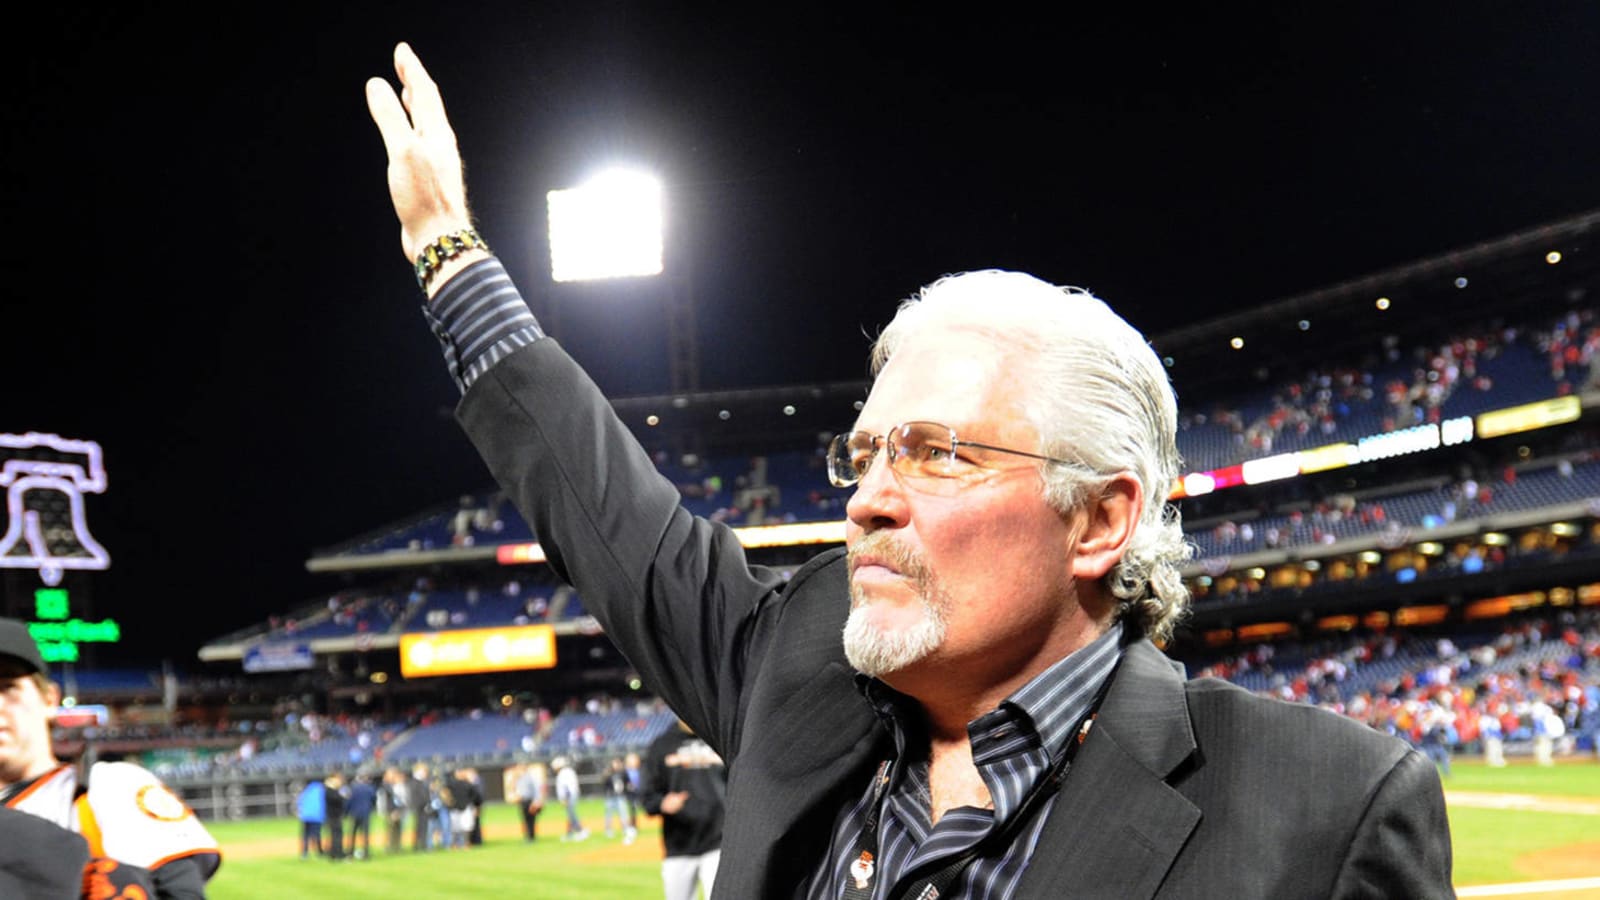 Giants' Brian Sabean could have interest in Mets job